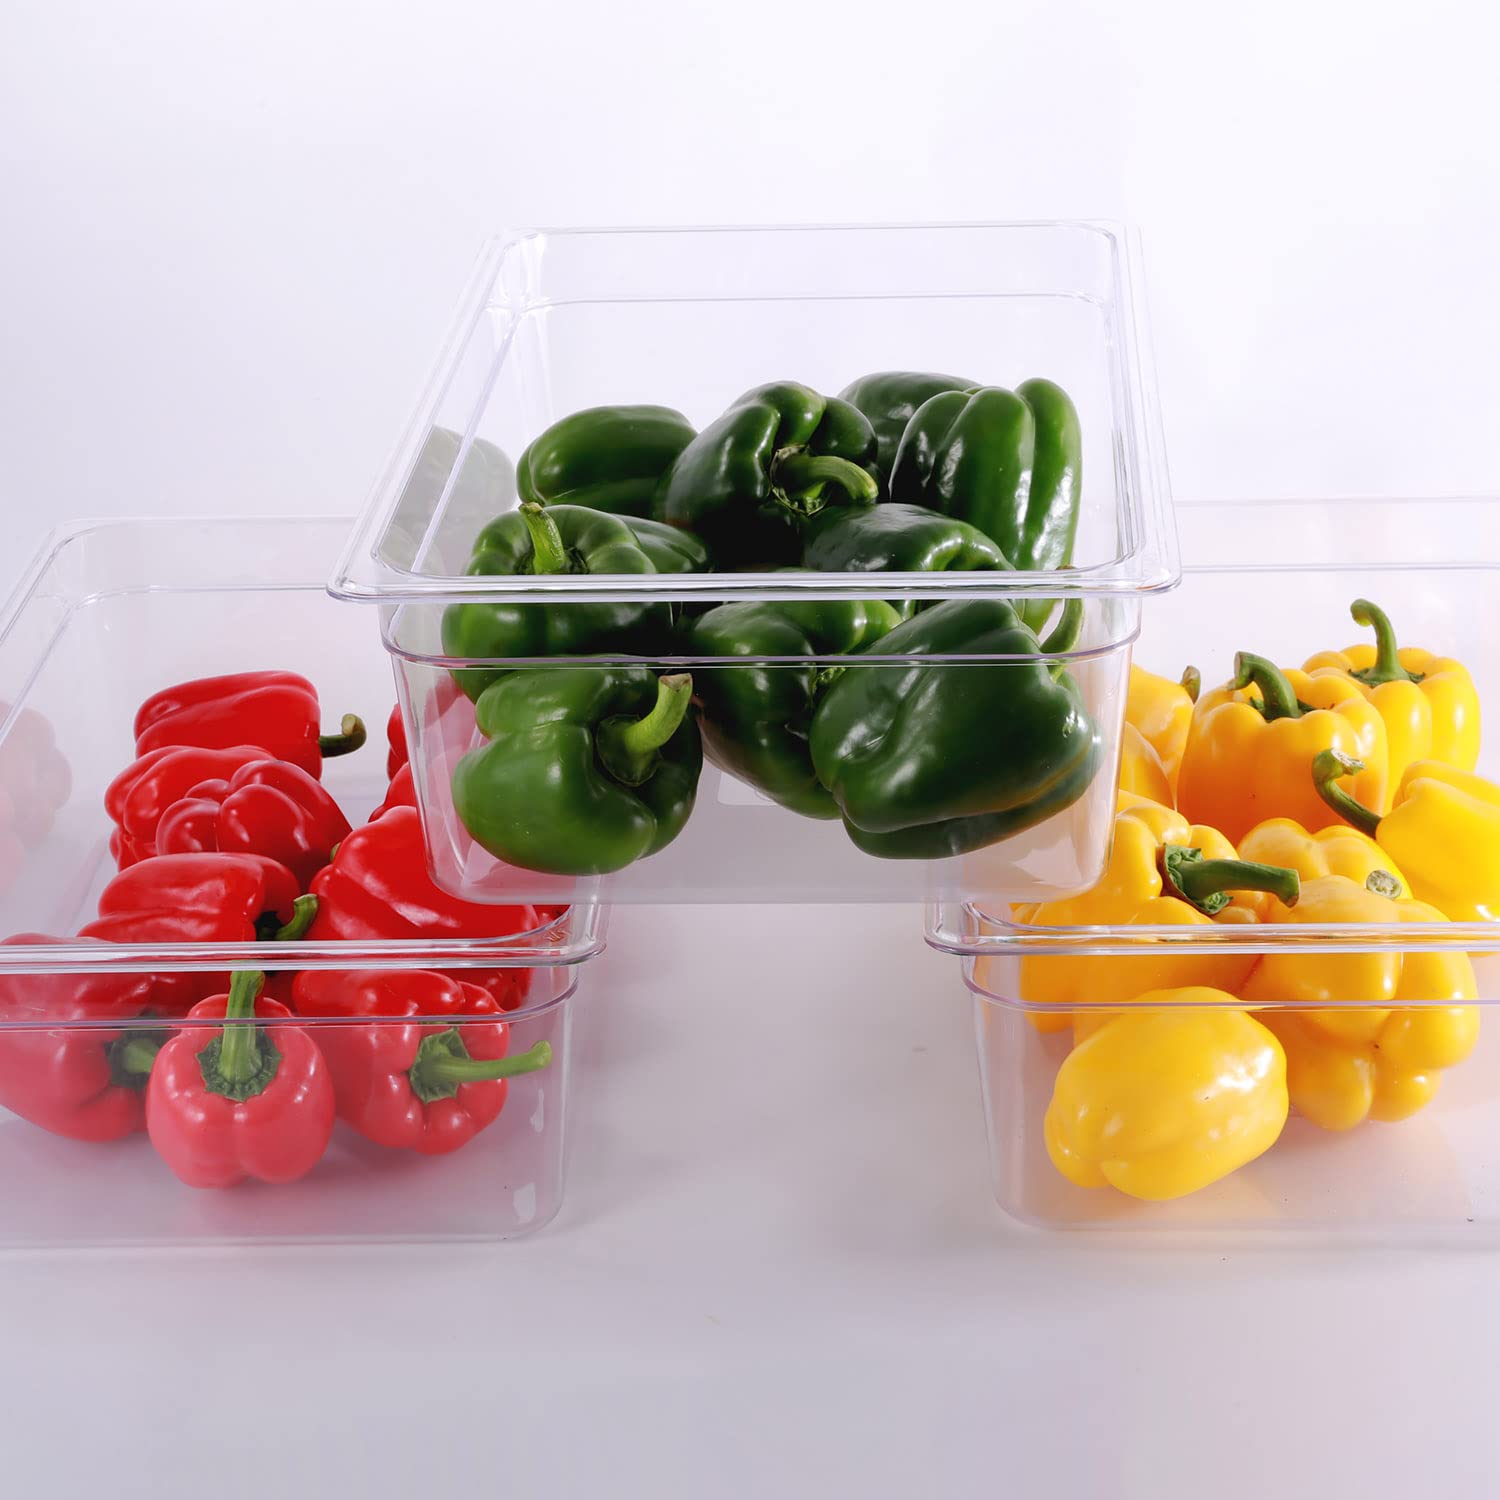 Hakka 1/1 Size 6-Pack Food Pan Full Size Clear Polycarbonate Food Pans 2.5" Deep Commercial Hotel Pans for Party, Restaurant, Hotel